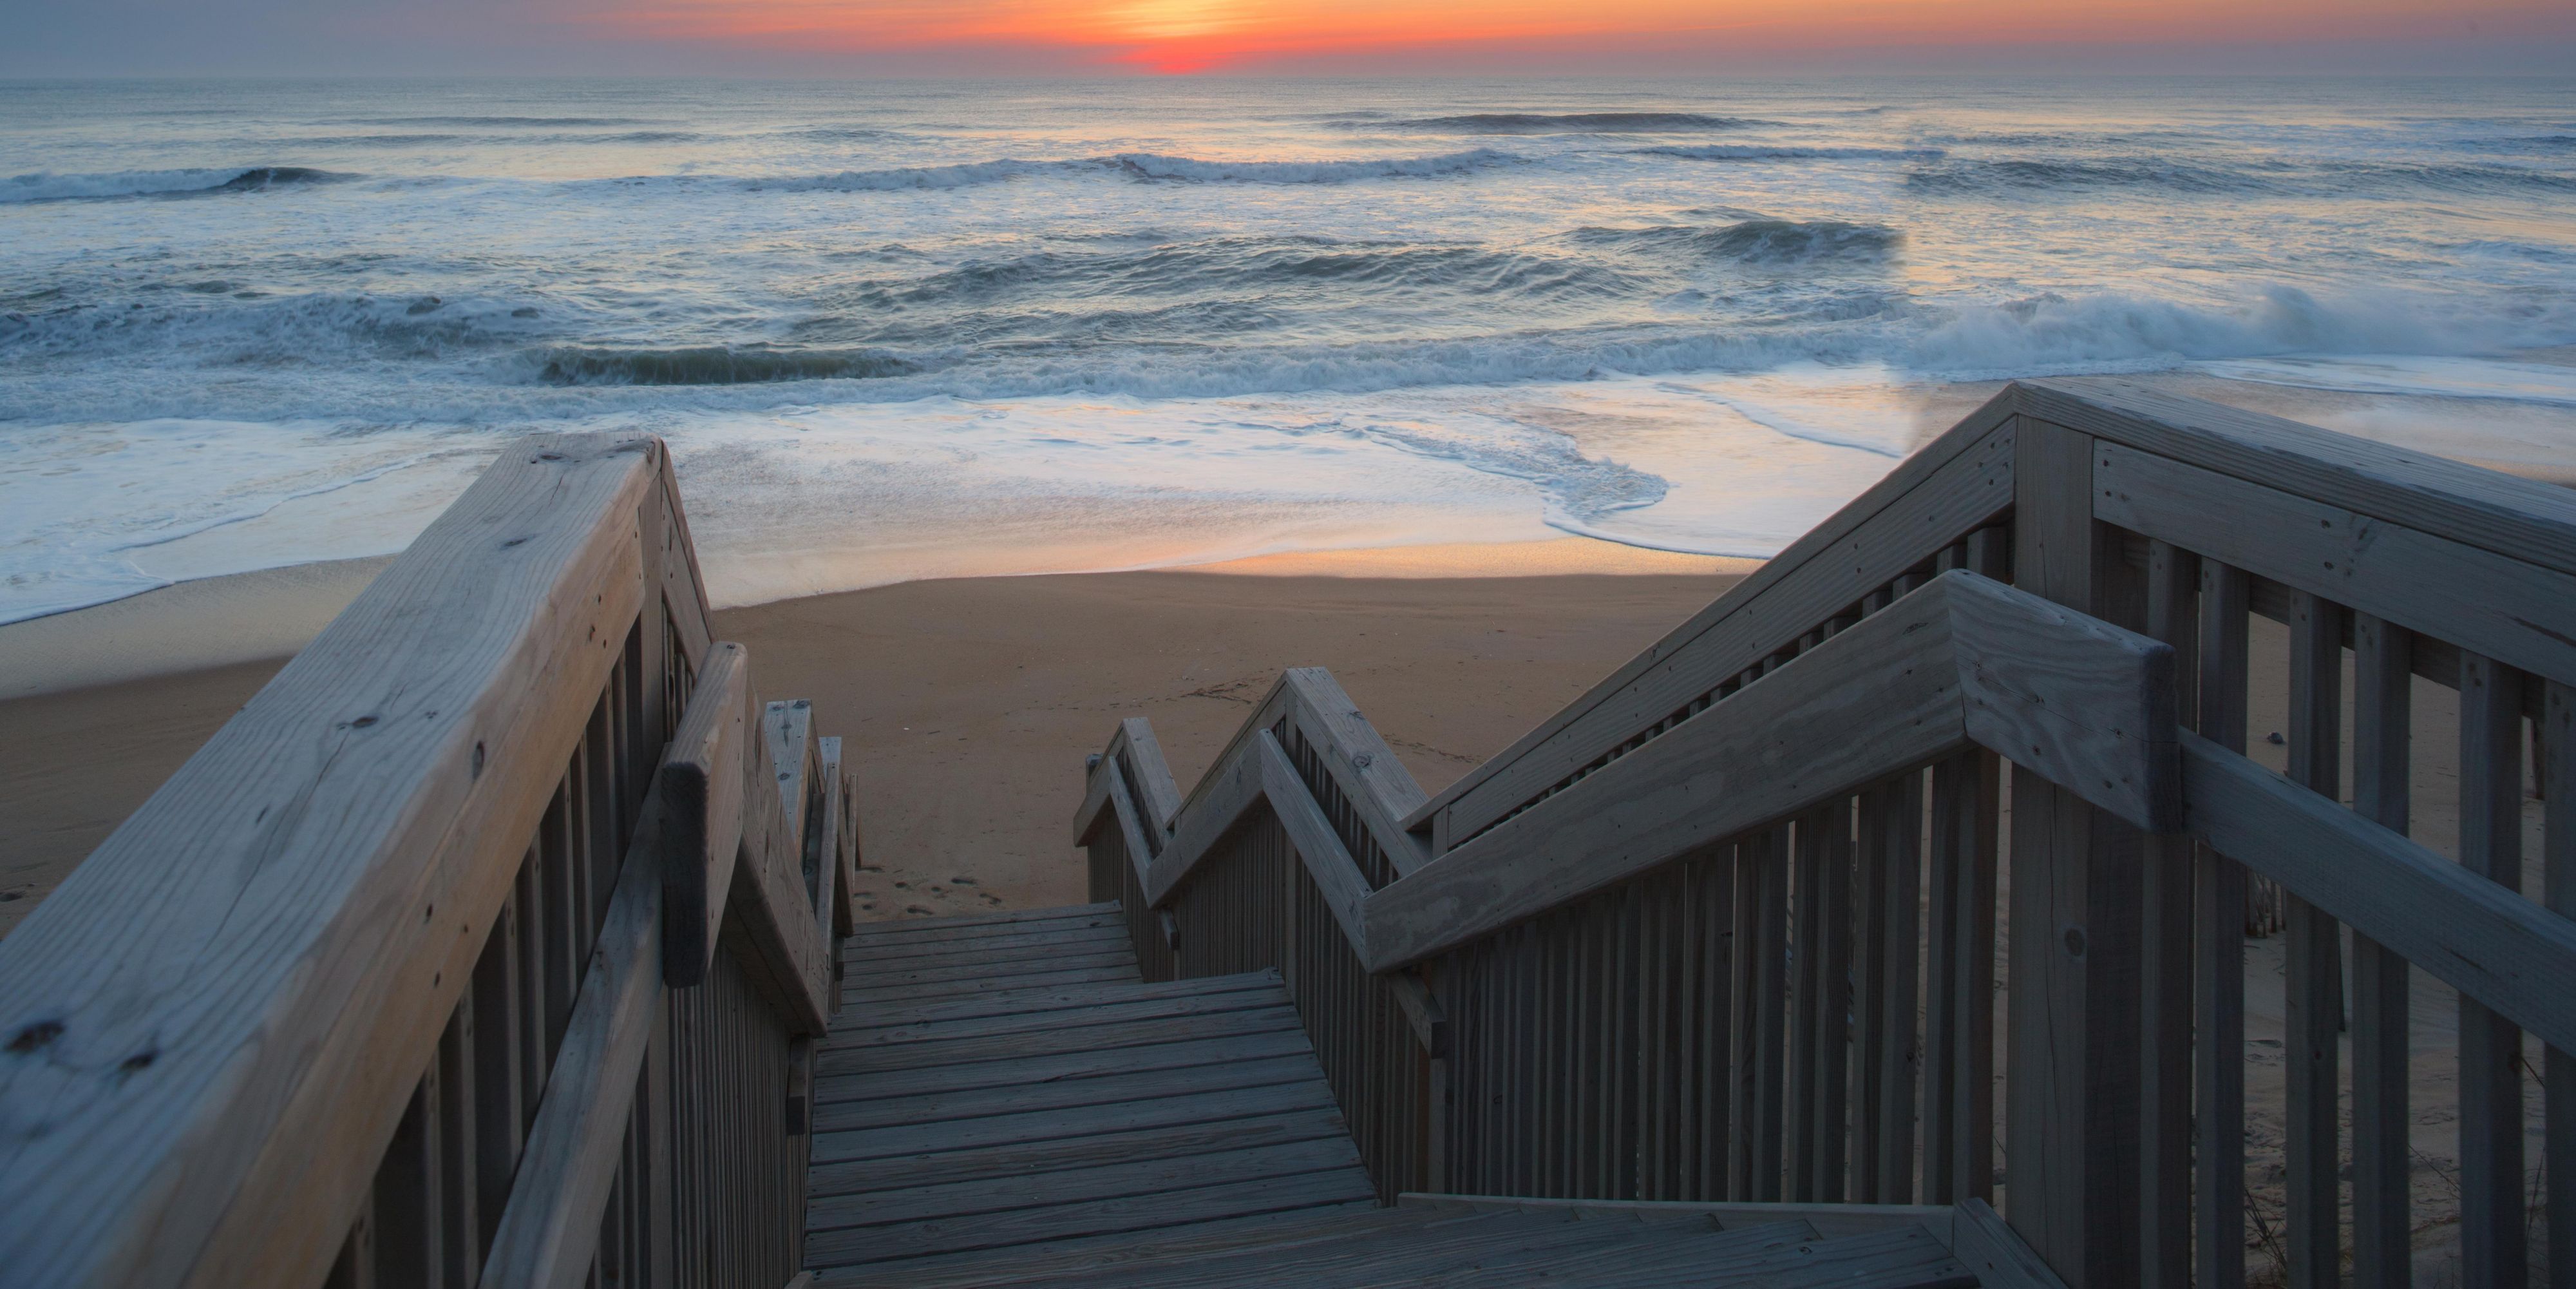 Toes in the sand just steps from your room! Enjoy private beach access on the Atlantic Coast in Nags Head, NC when you stay with us at the Holiday Inn Express. We can't wait to welcome you!